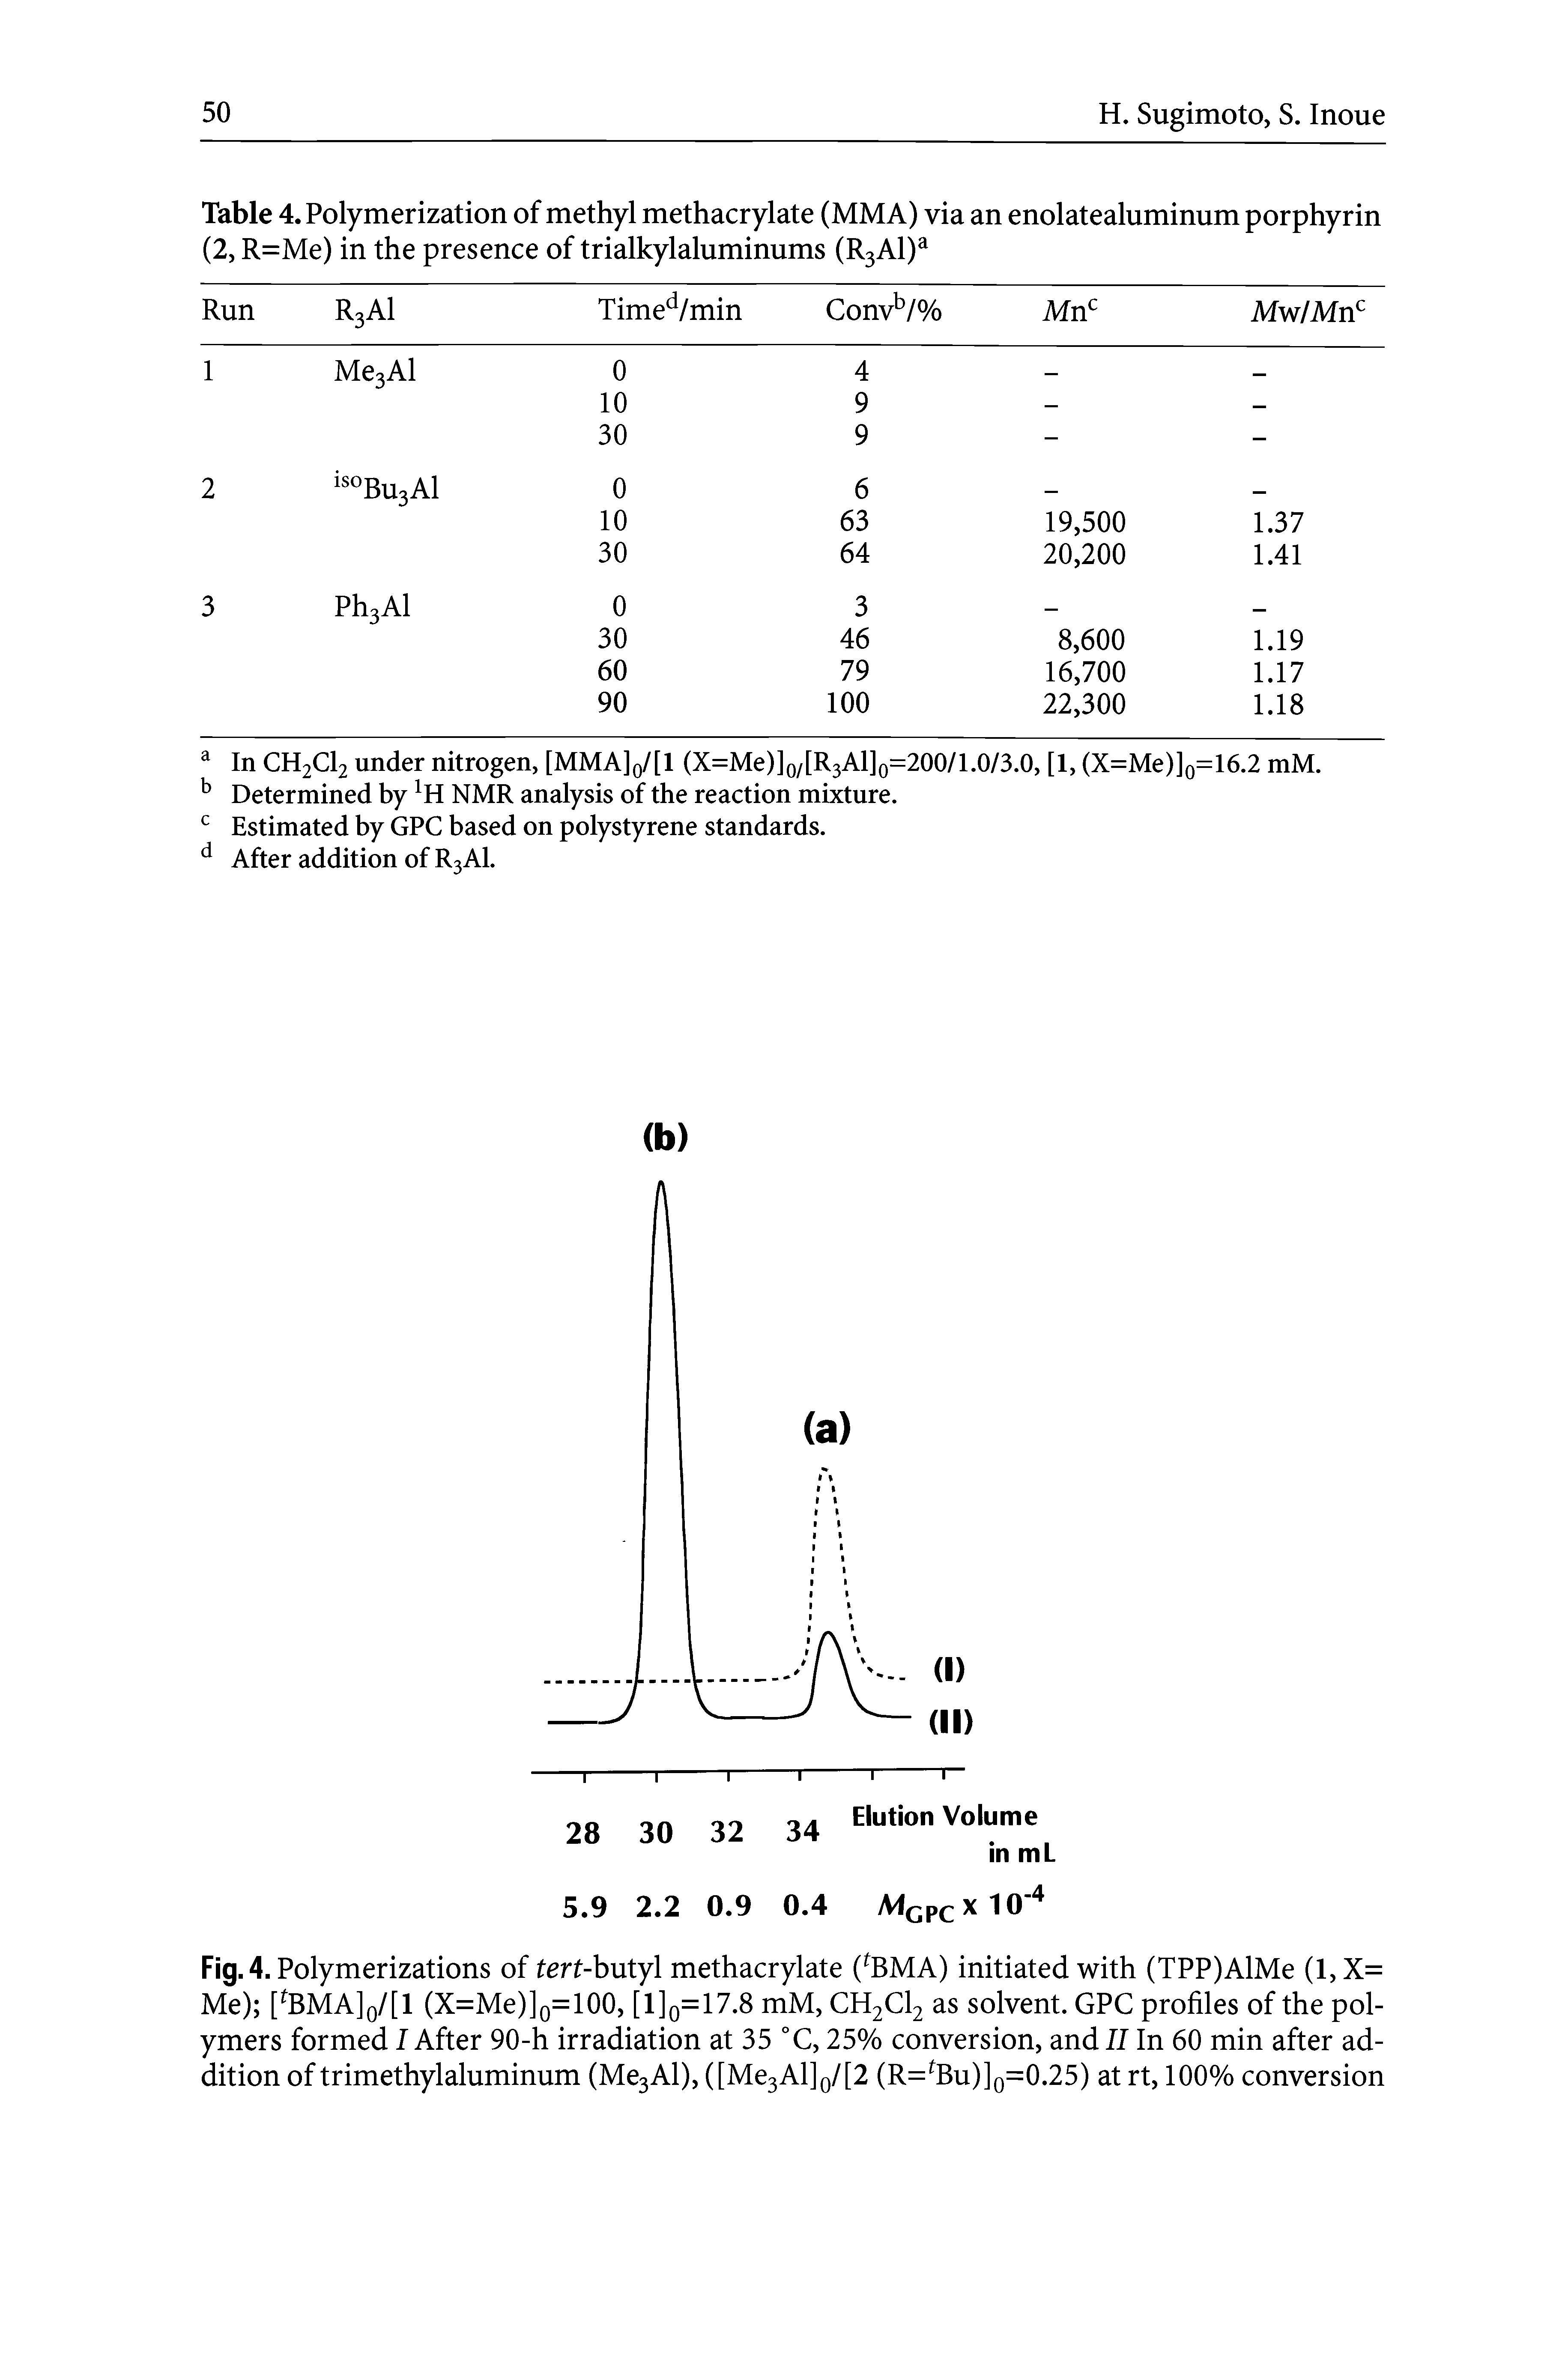 Fig. 4. Polymerizations of ferf-butyl methacrylate ( BMA) initiated with (TPP)AlMe (1,X= Me) [ BMA]q/[1 (X=Me)]o=100, [l]o=17.8 mM, CH2CI2 as solvent. GPC profiles of the polymers formed I After 90-h irradiation at 35 °C, 25% conversion, and II In 60 min after addition of trimethylaluminum (Me3Al), ([Me3Al]o/[2 (R= Bu)]q=0.25) at rt, 100% conversion...